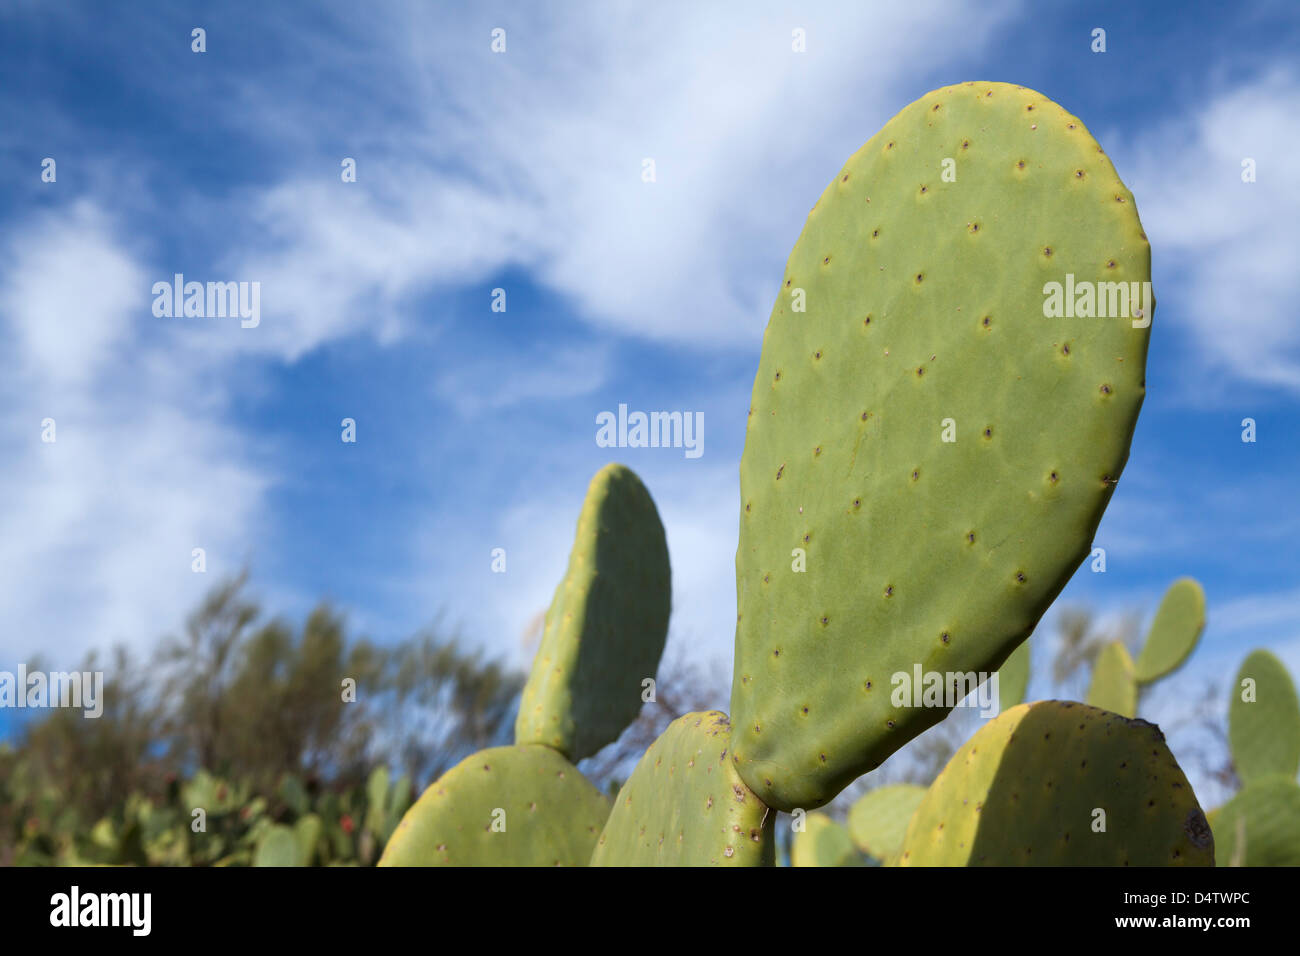 Close up of a Wild Prickly Pear Cactus, Andalusia / Almeria Province, Spain Stock Photo